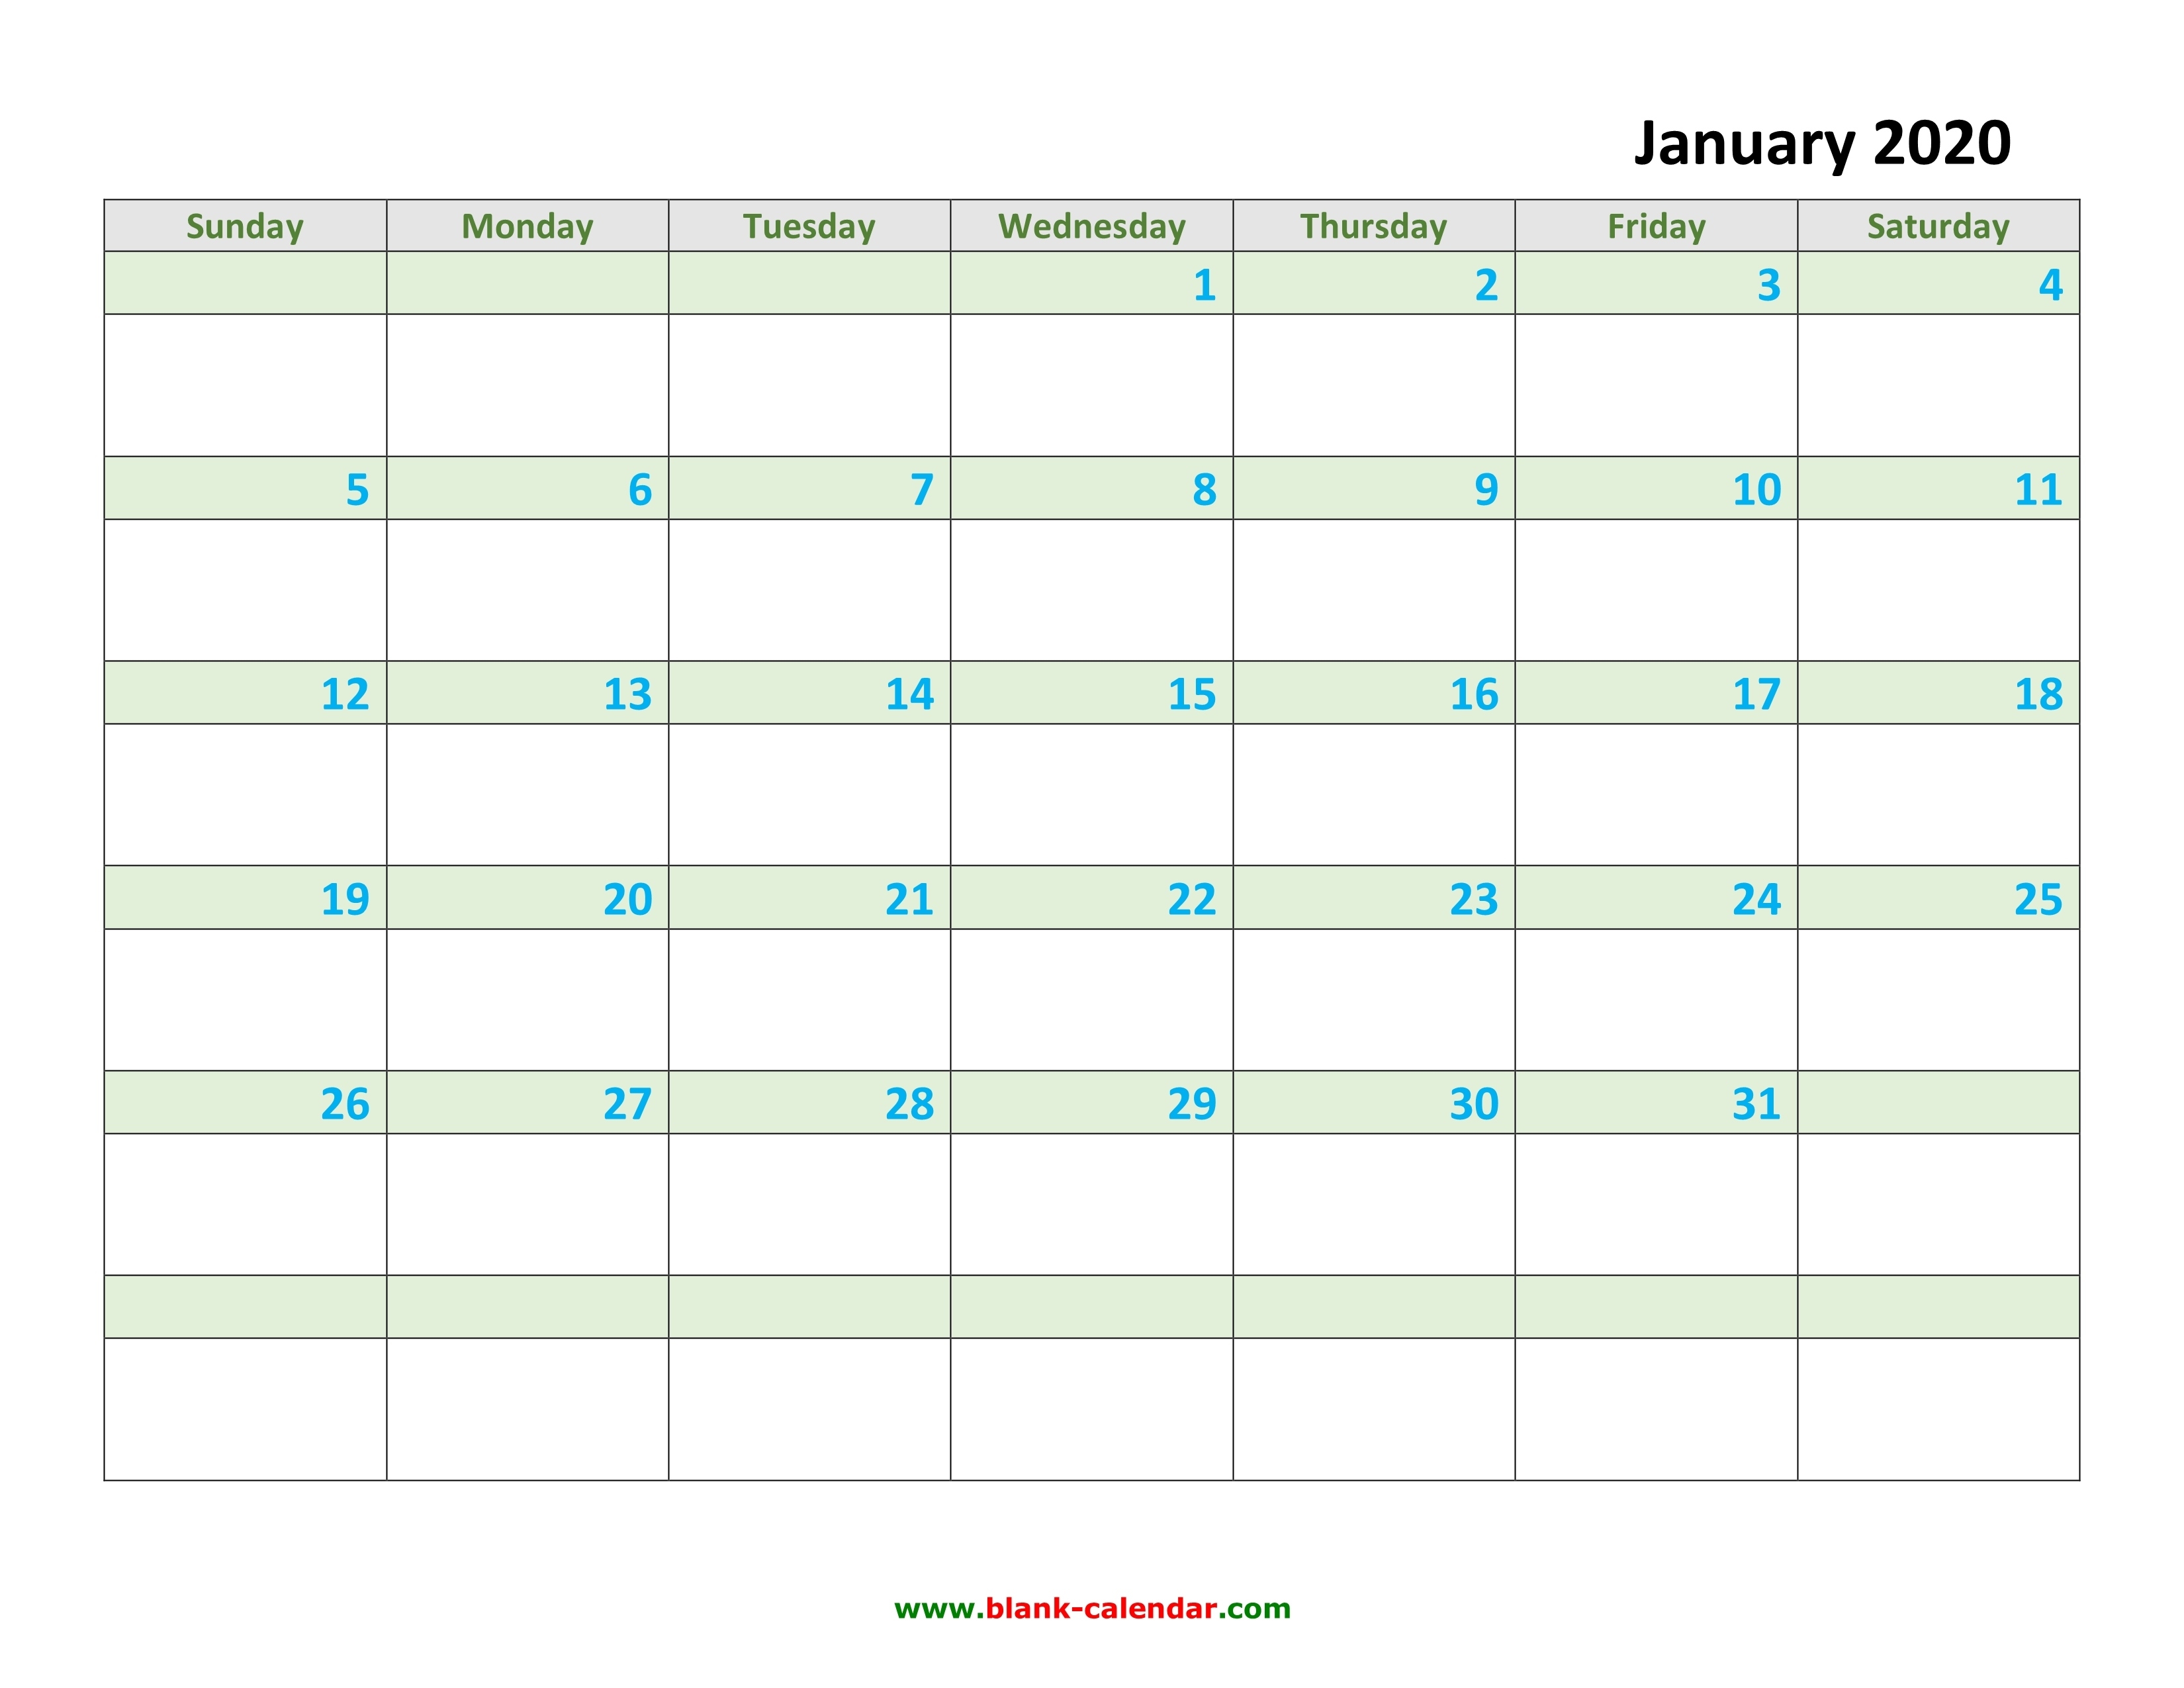 Monthly Calendar 2020 | Free Download, Editable And Printable Calendar Template That Can Be Edited